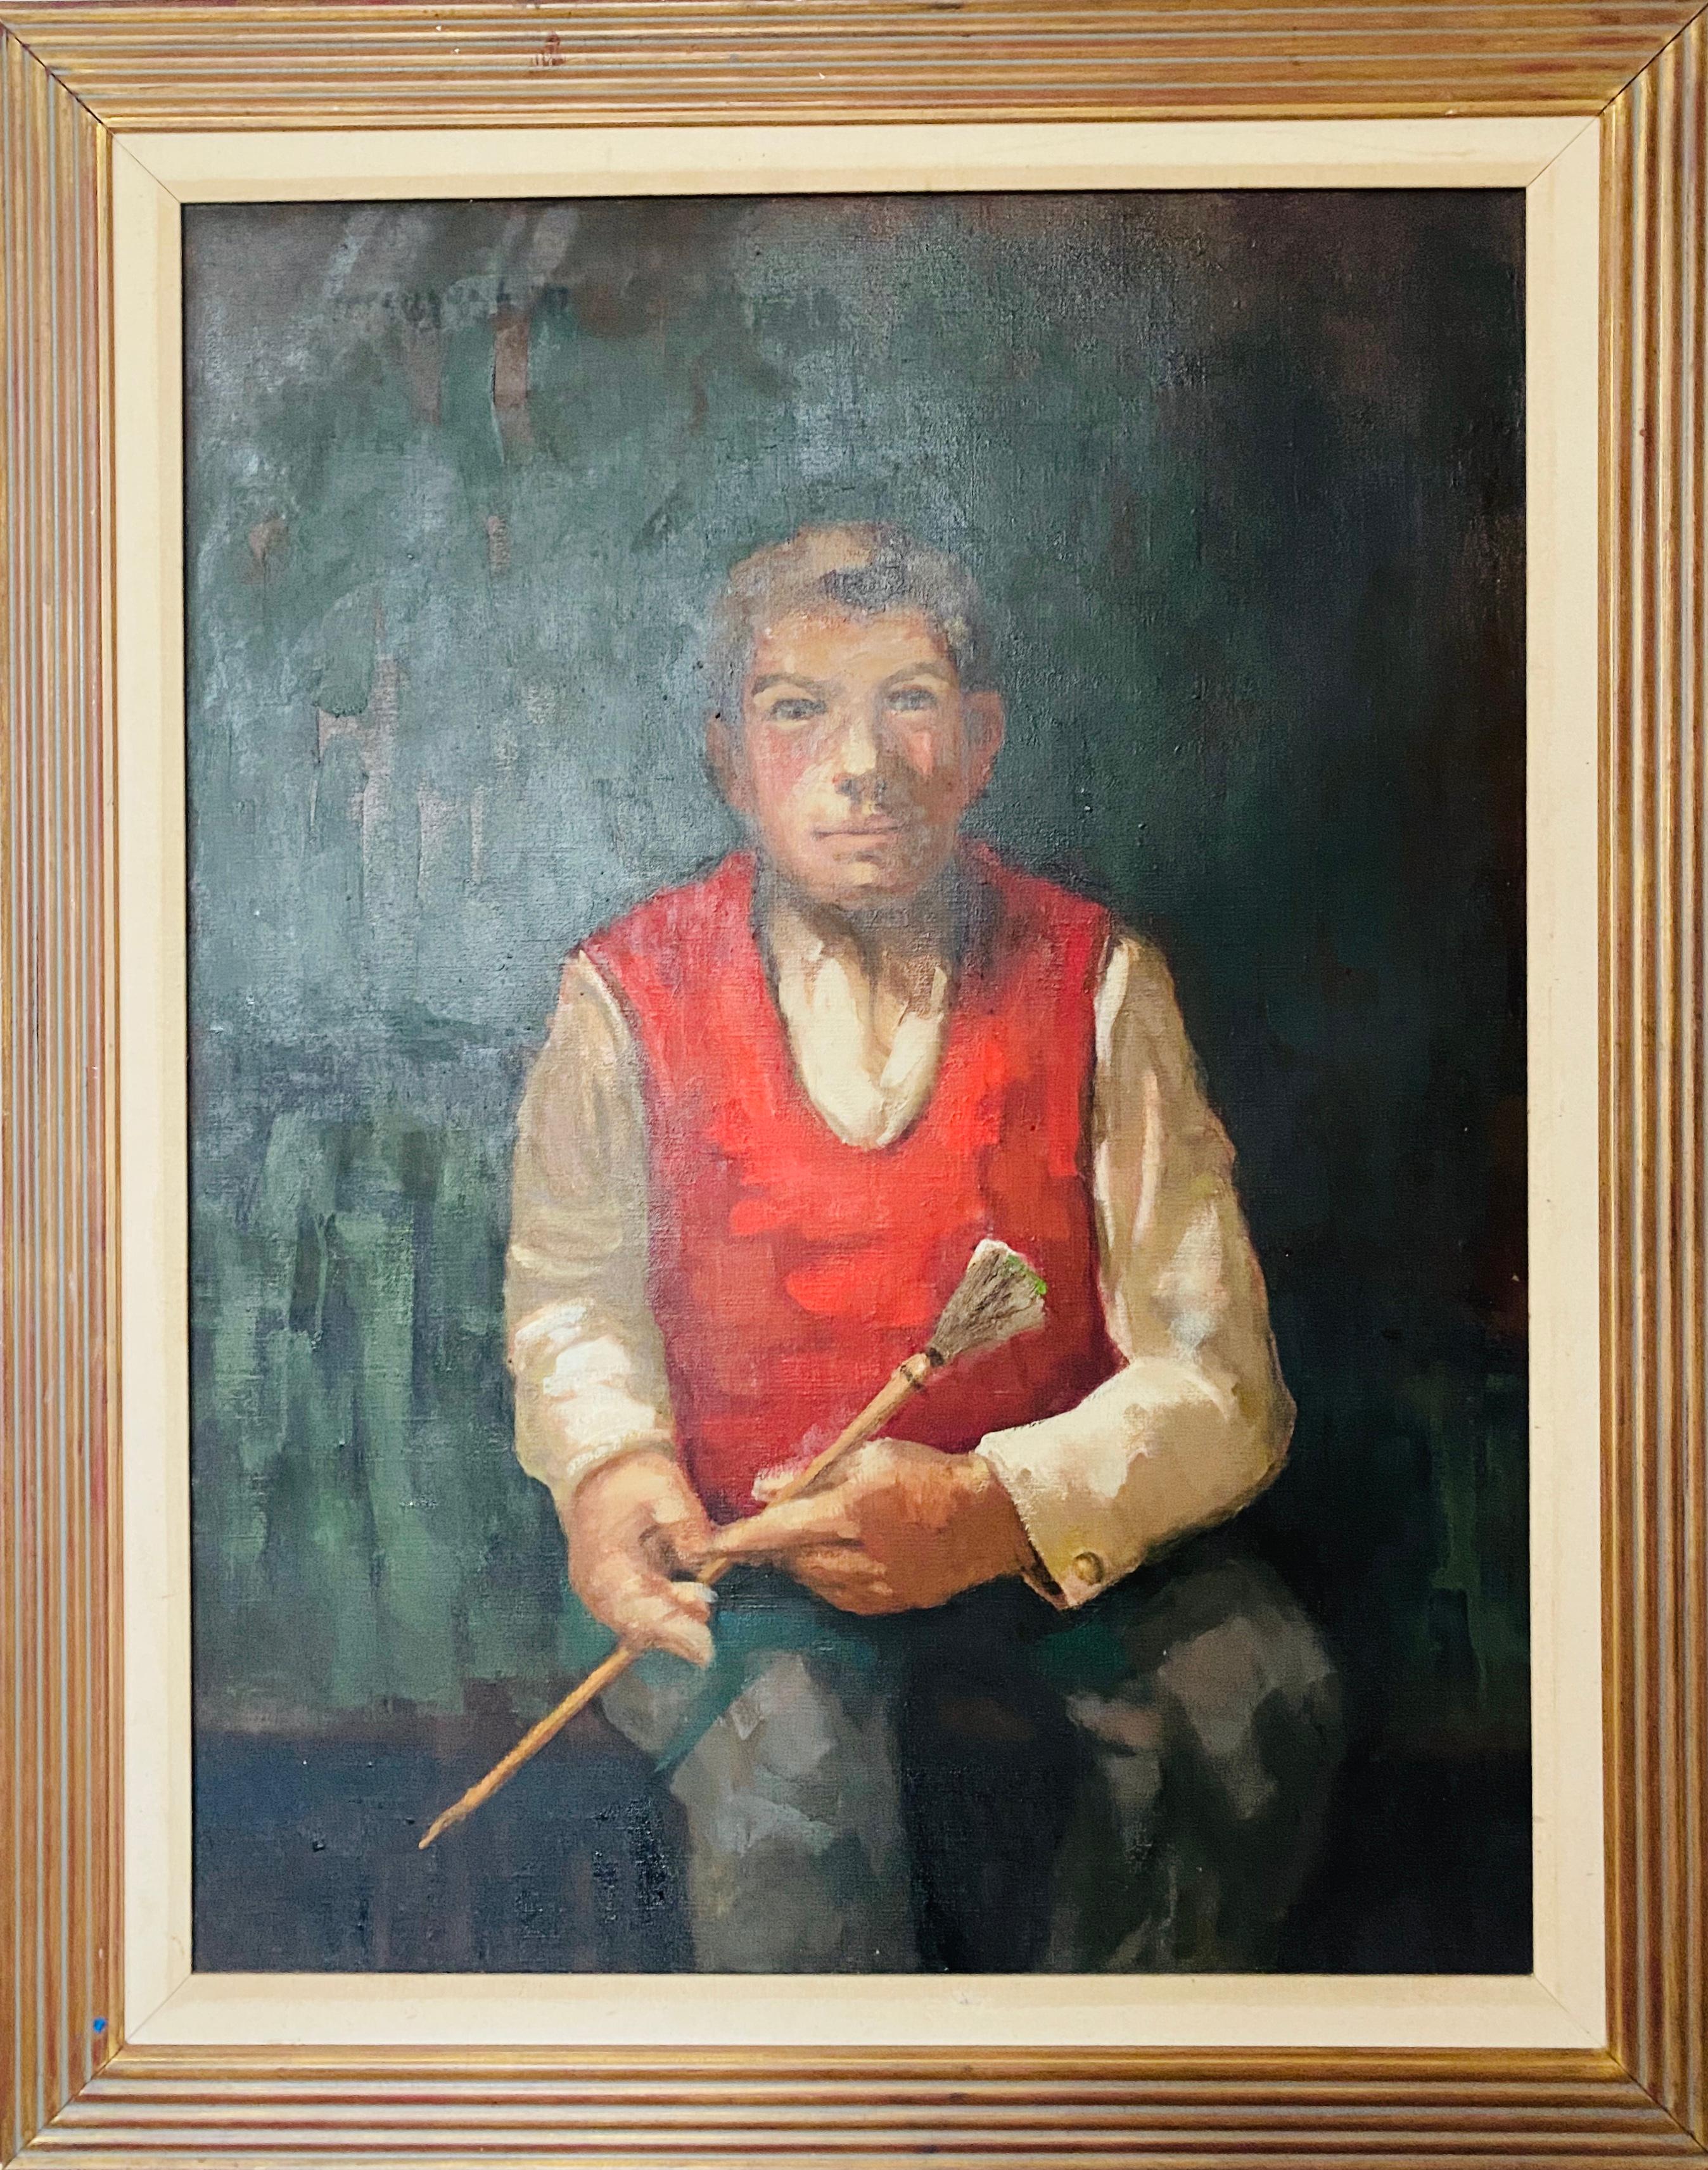 Adam, Oil on Canvas, Signed and Dated '91, 20th Centuary, Portrait, (framed)  - Painting by Tadeusz Jaroszynski